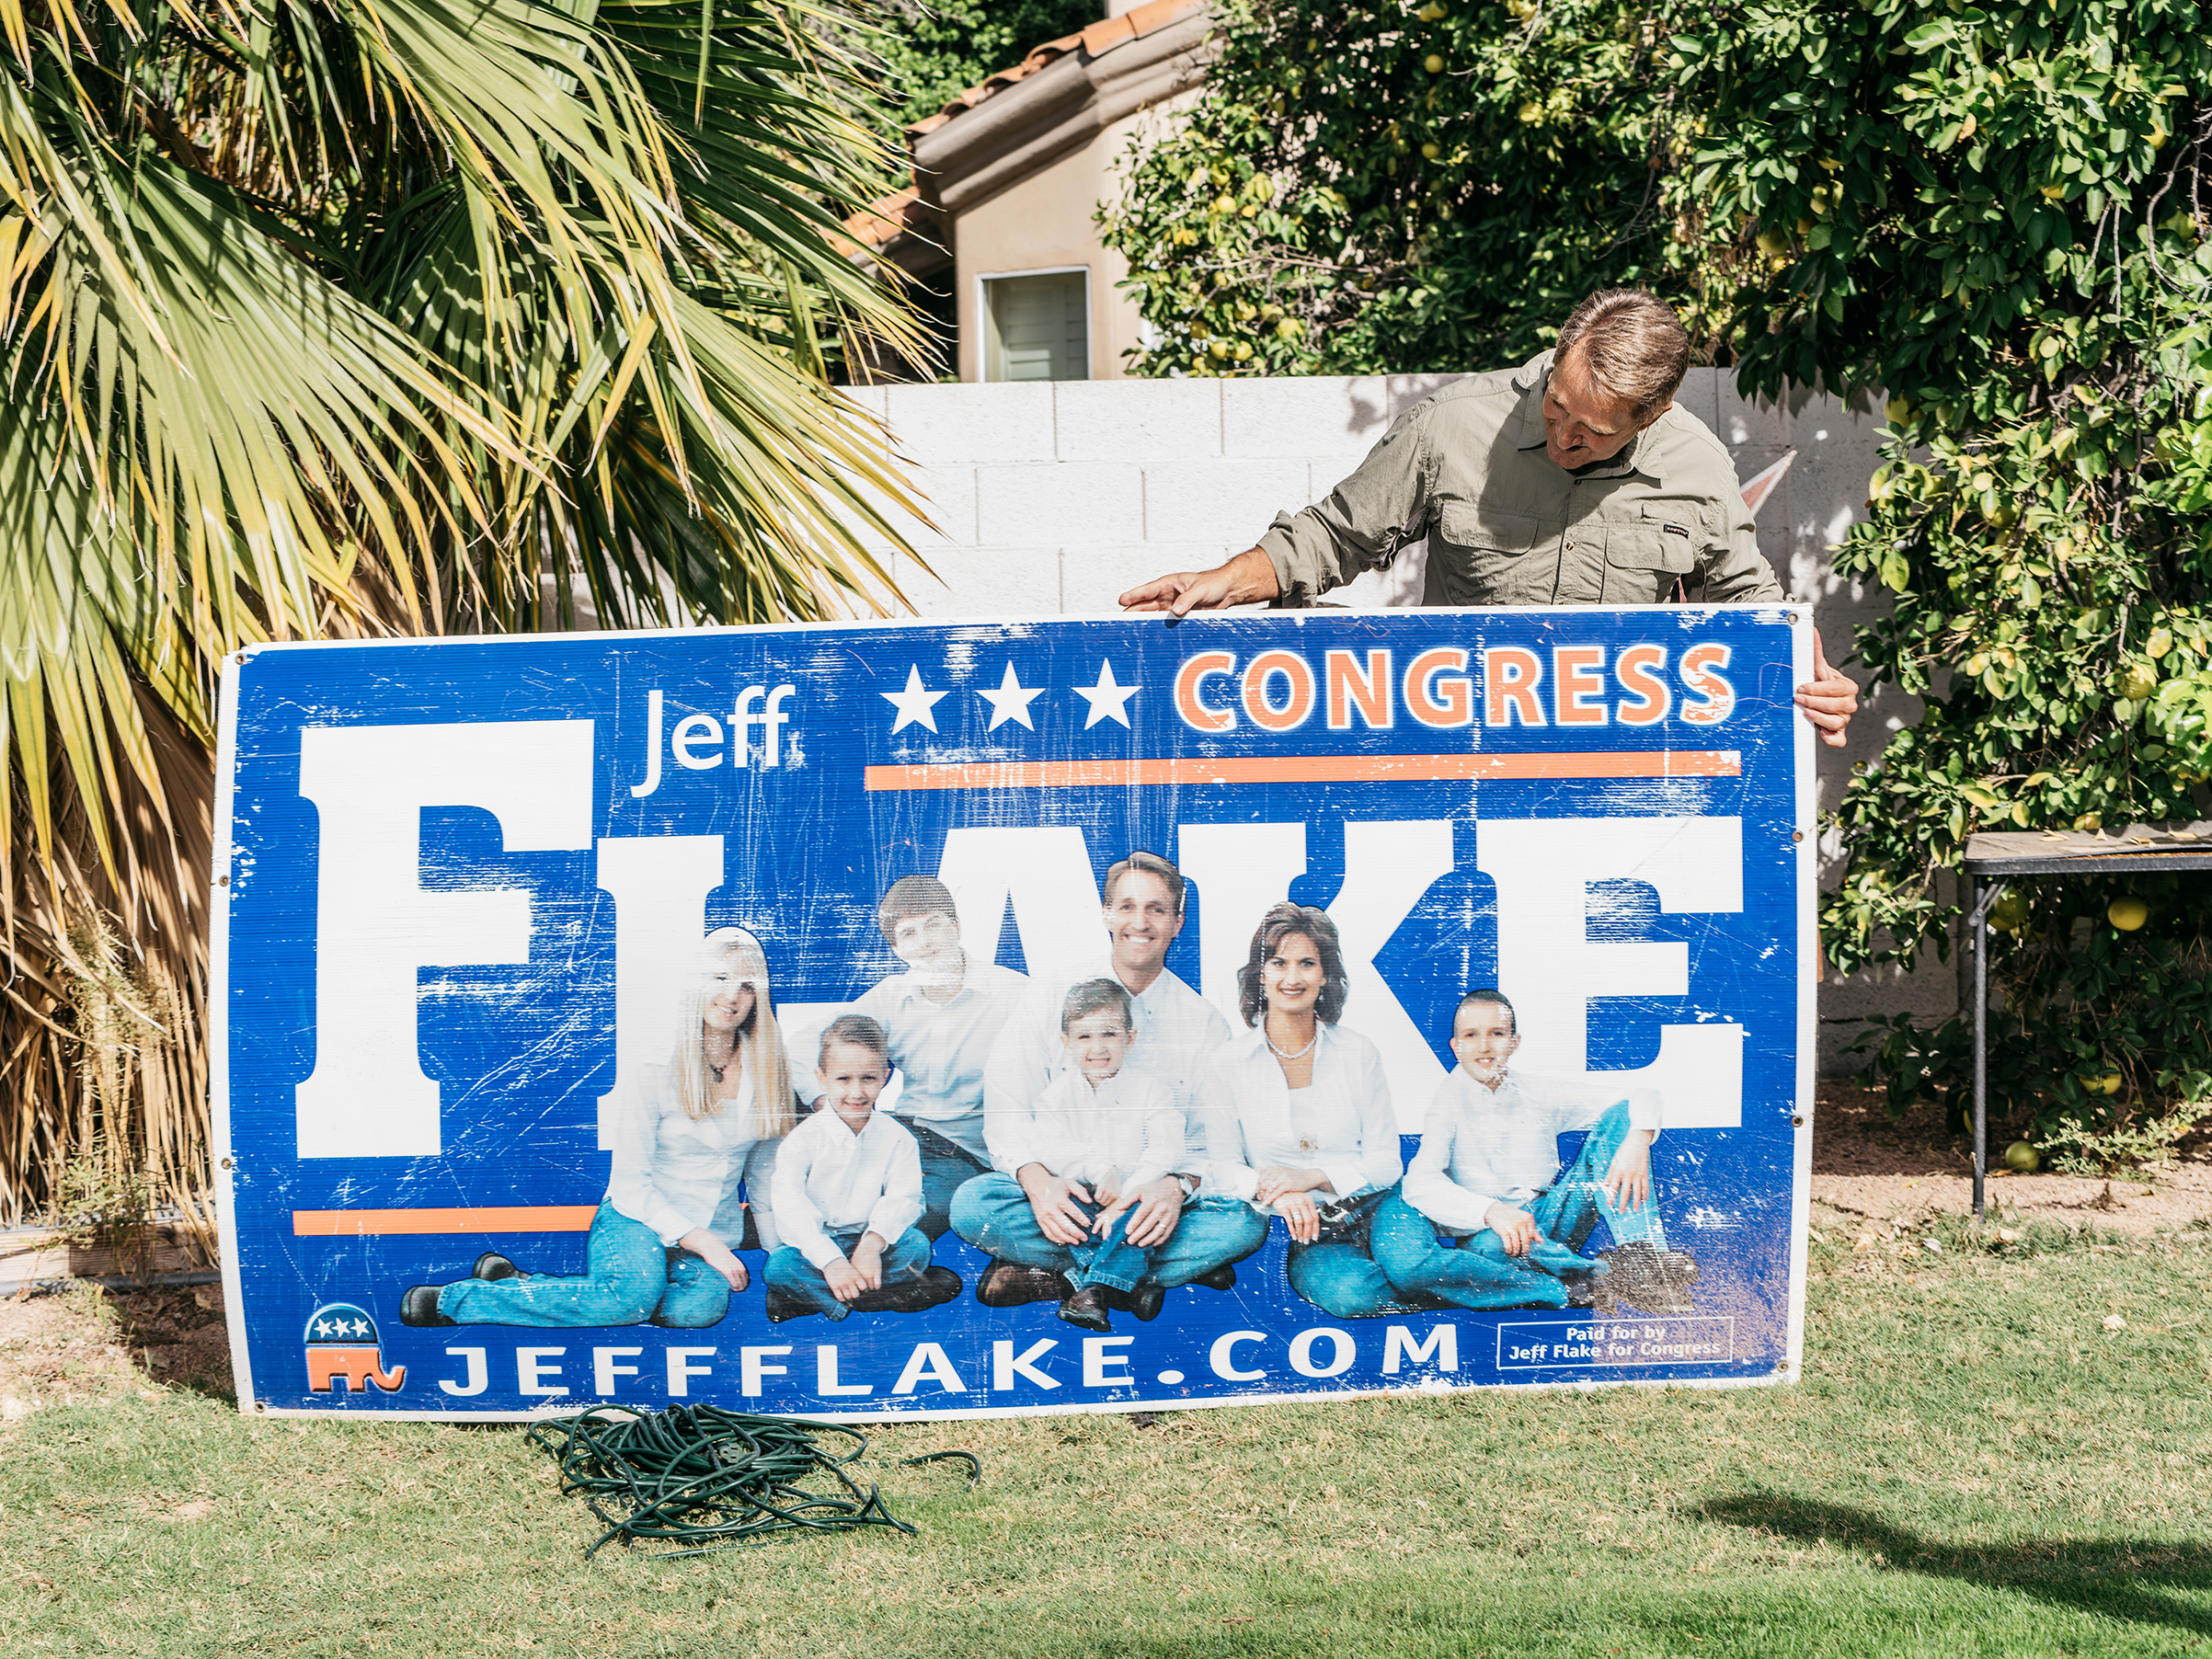 Party-of-One-1p- Jeff- Flake